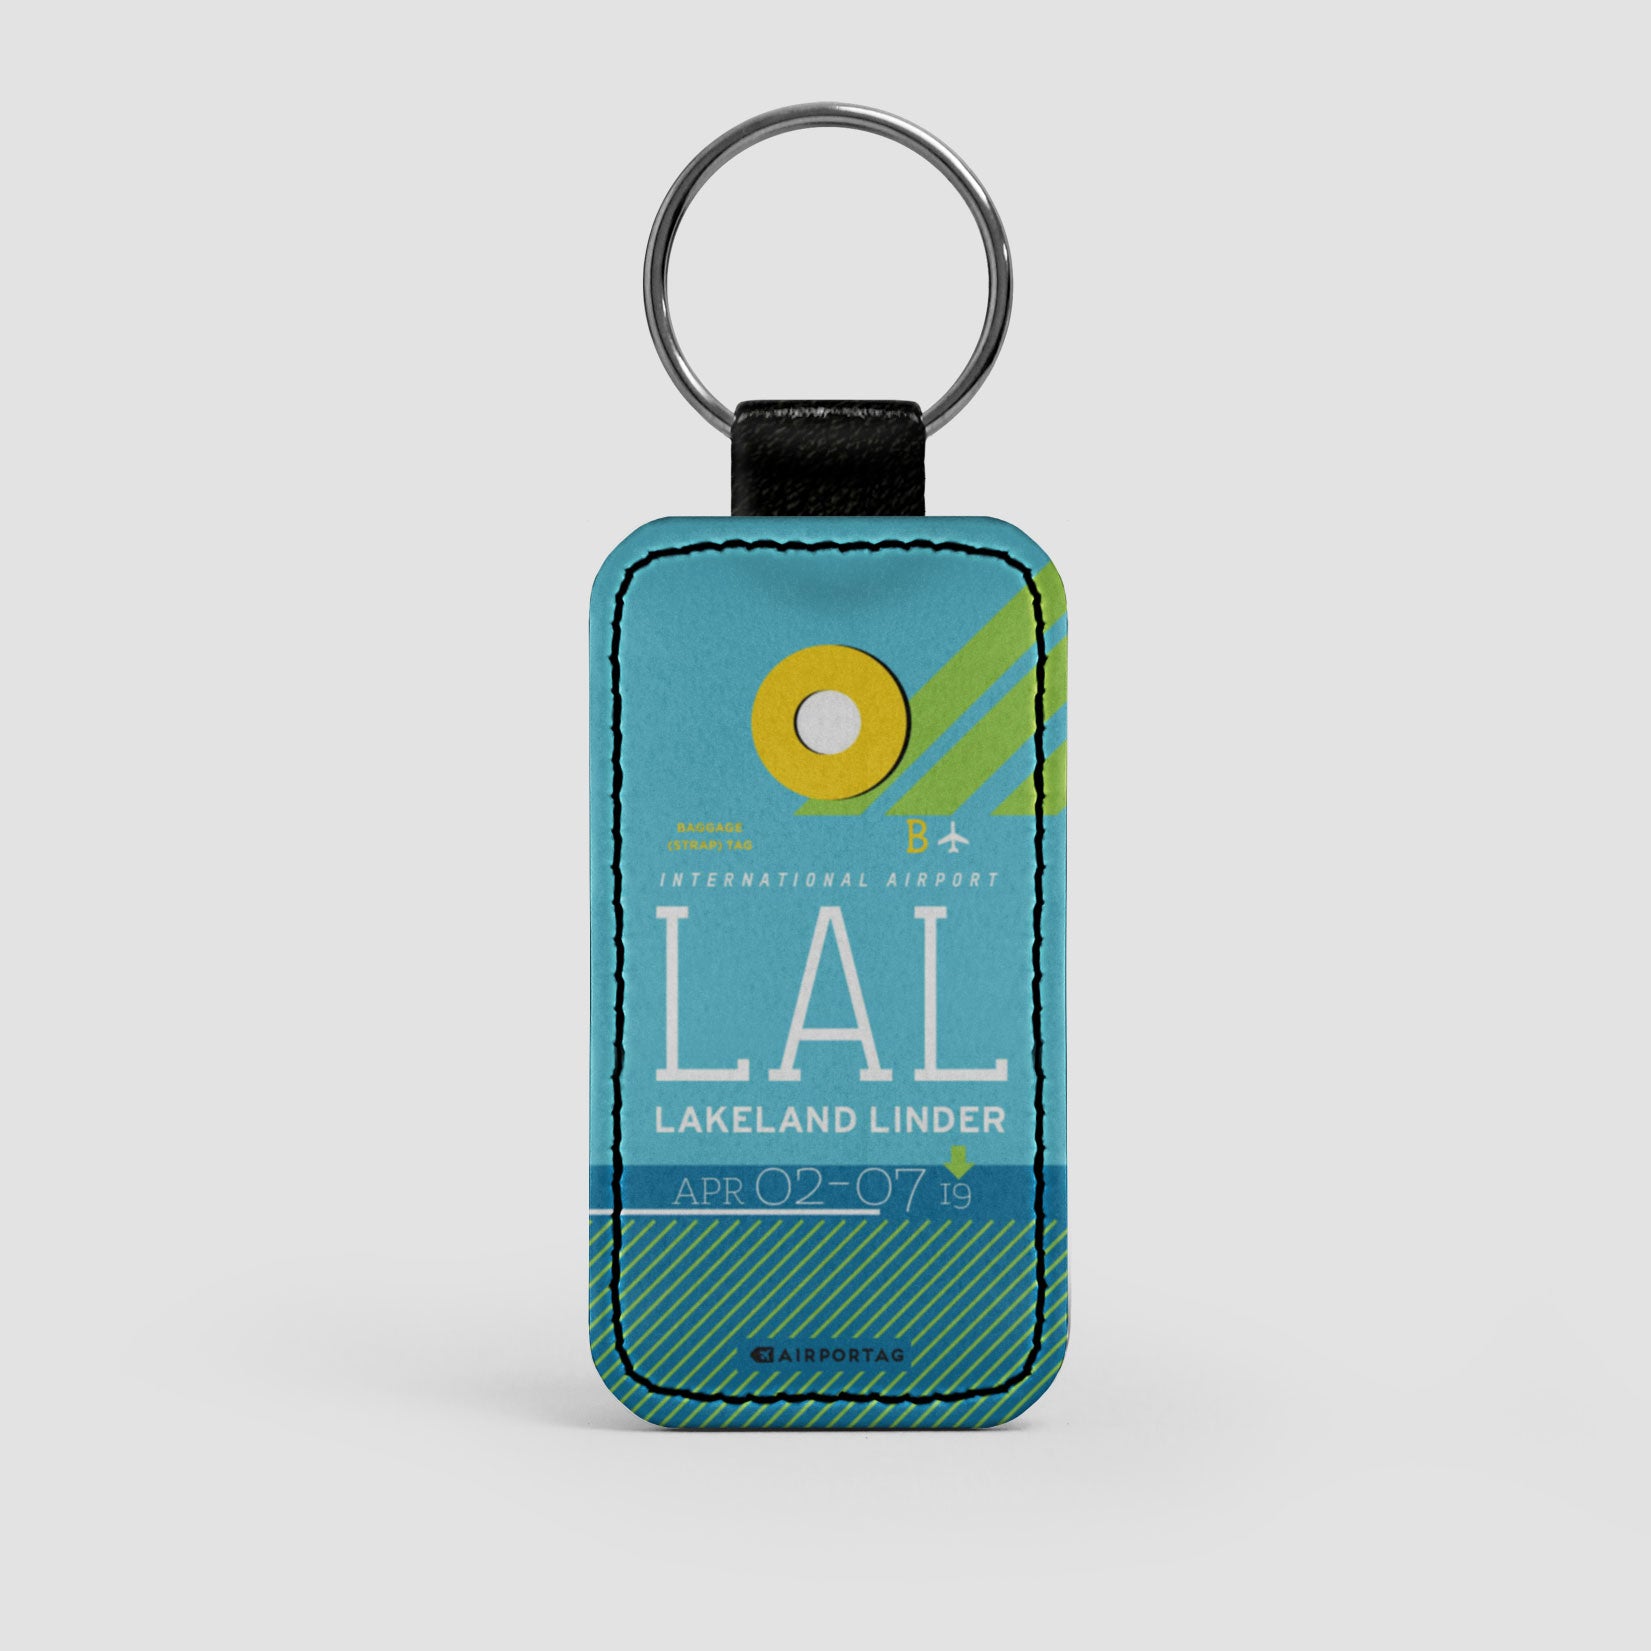 LAL - Sun'nFun - Leather Keychain - Airportag